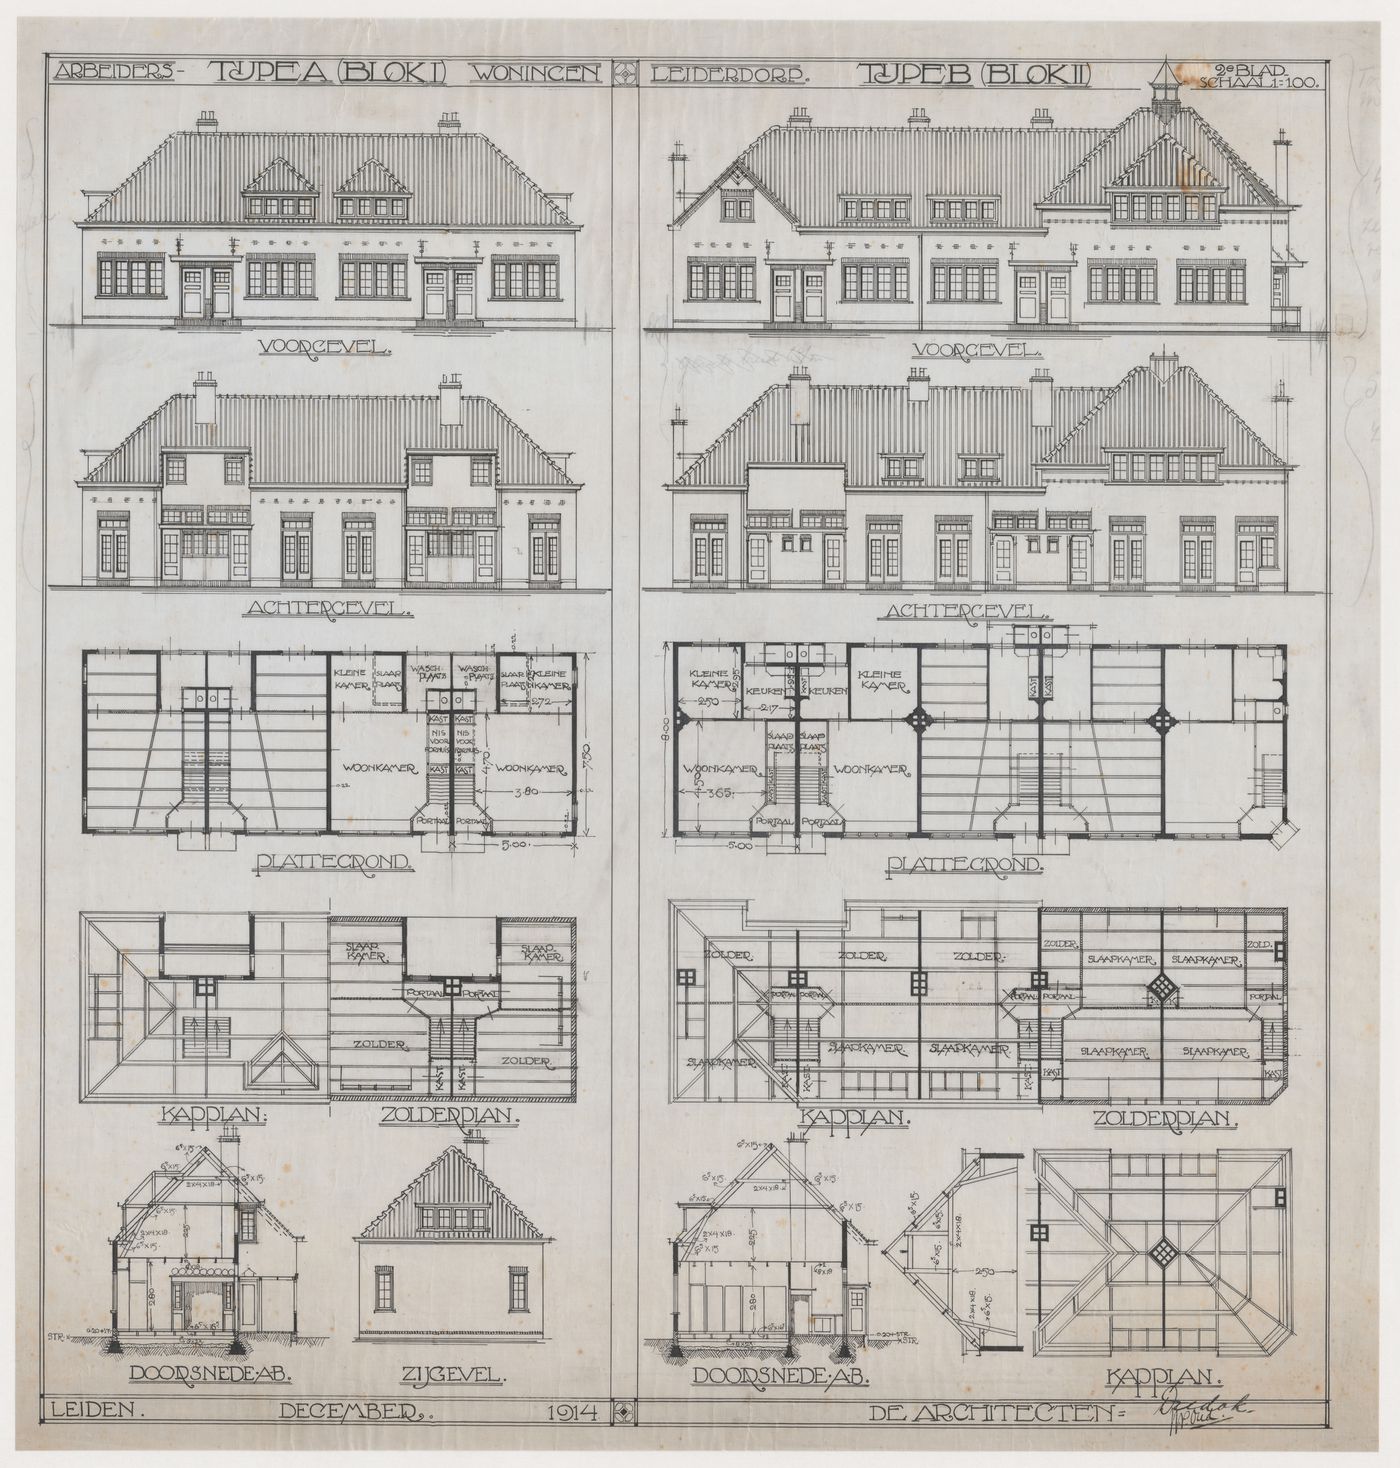 Plans, sections, and elevations for Blocks 1 and 2 of Leiderdorp Housing Estate, Leiderdorp, Netherlands